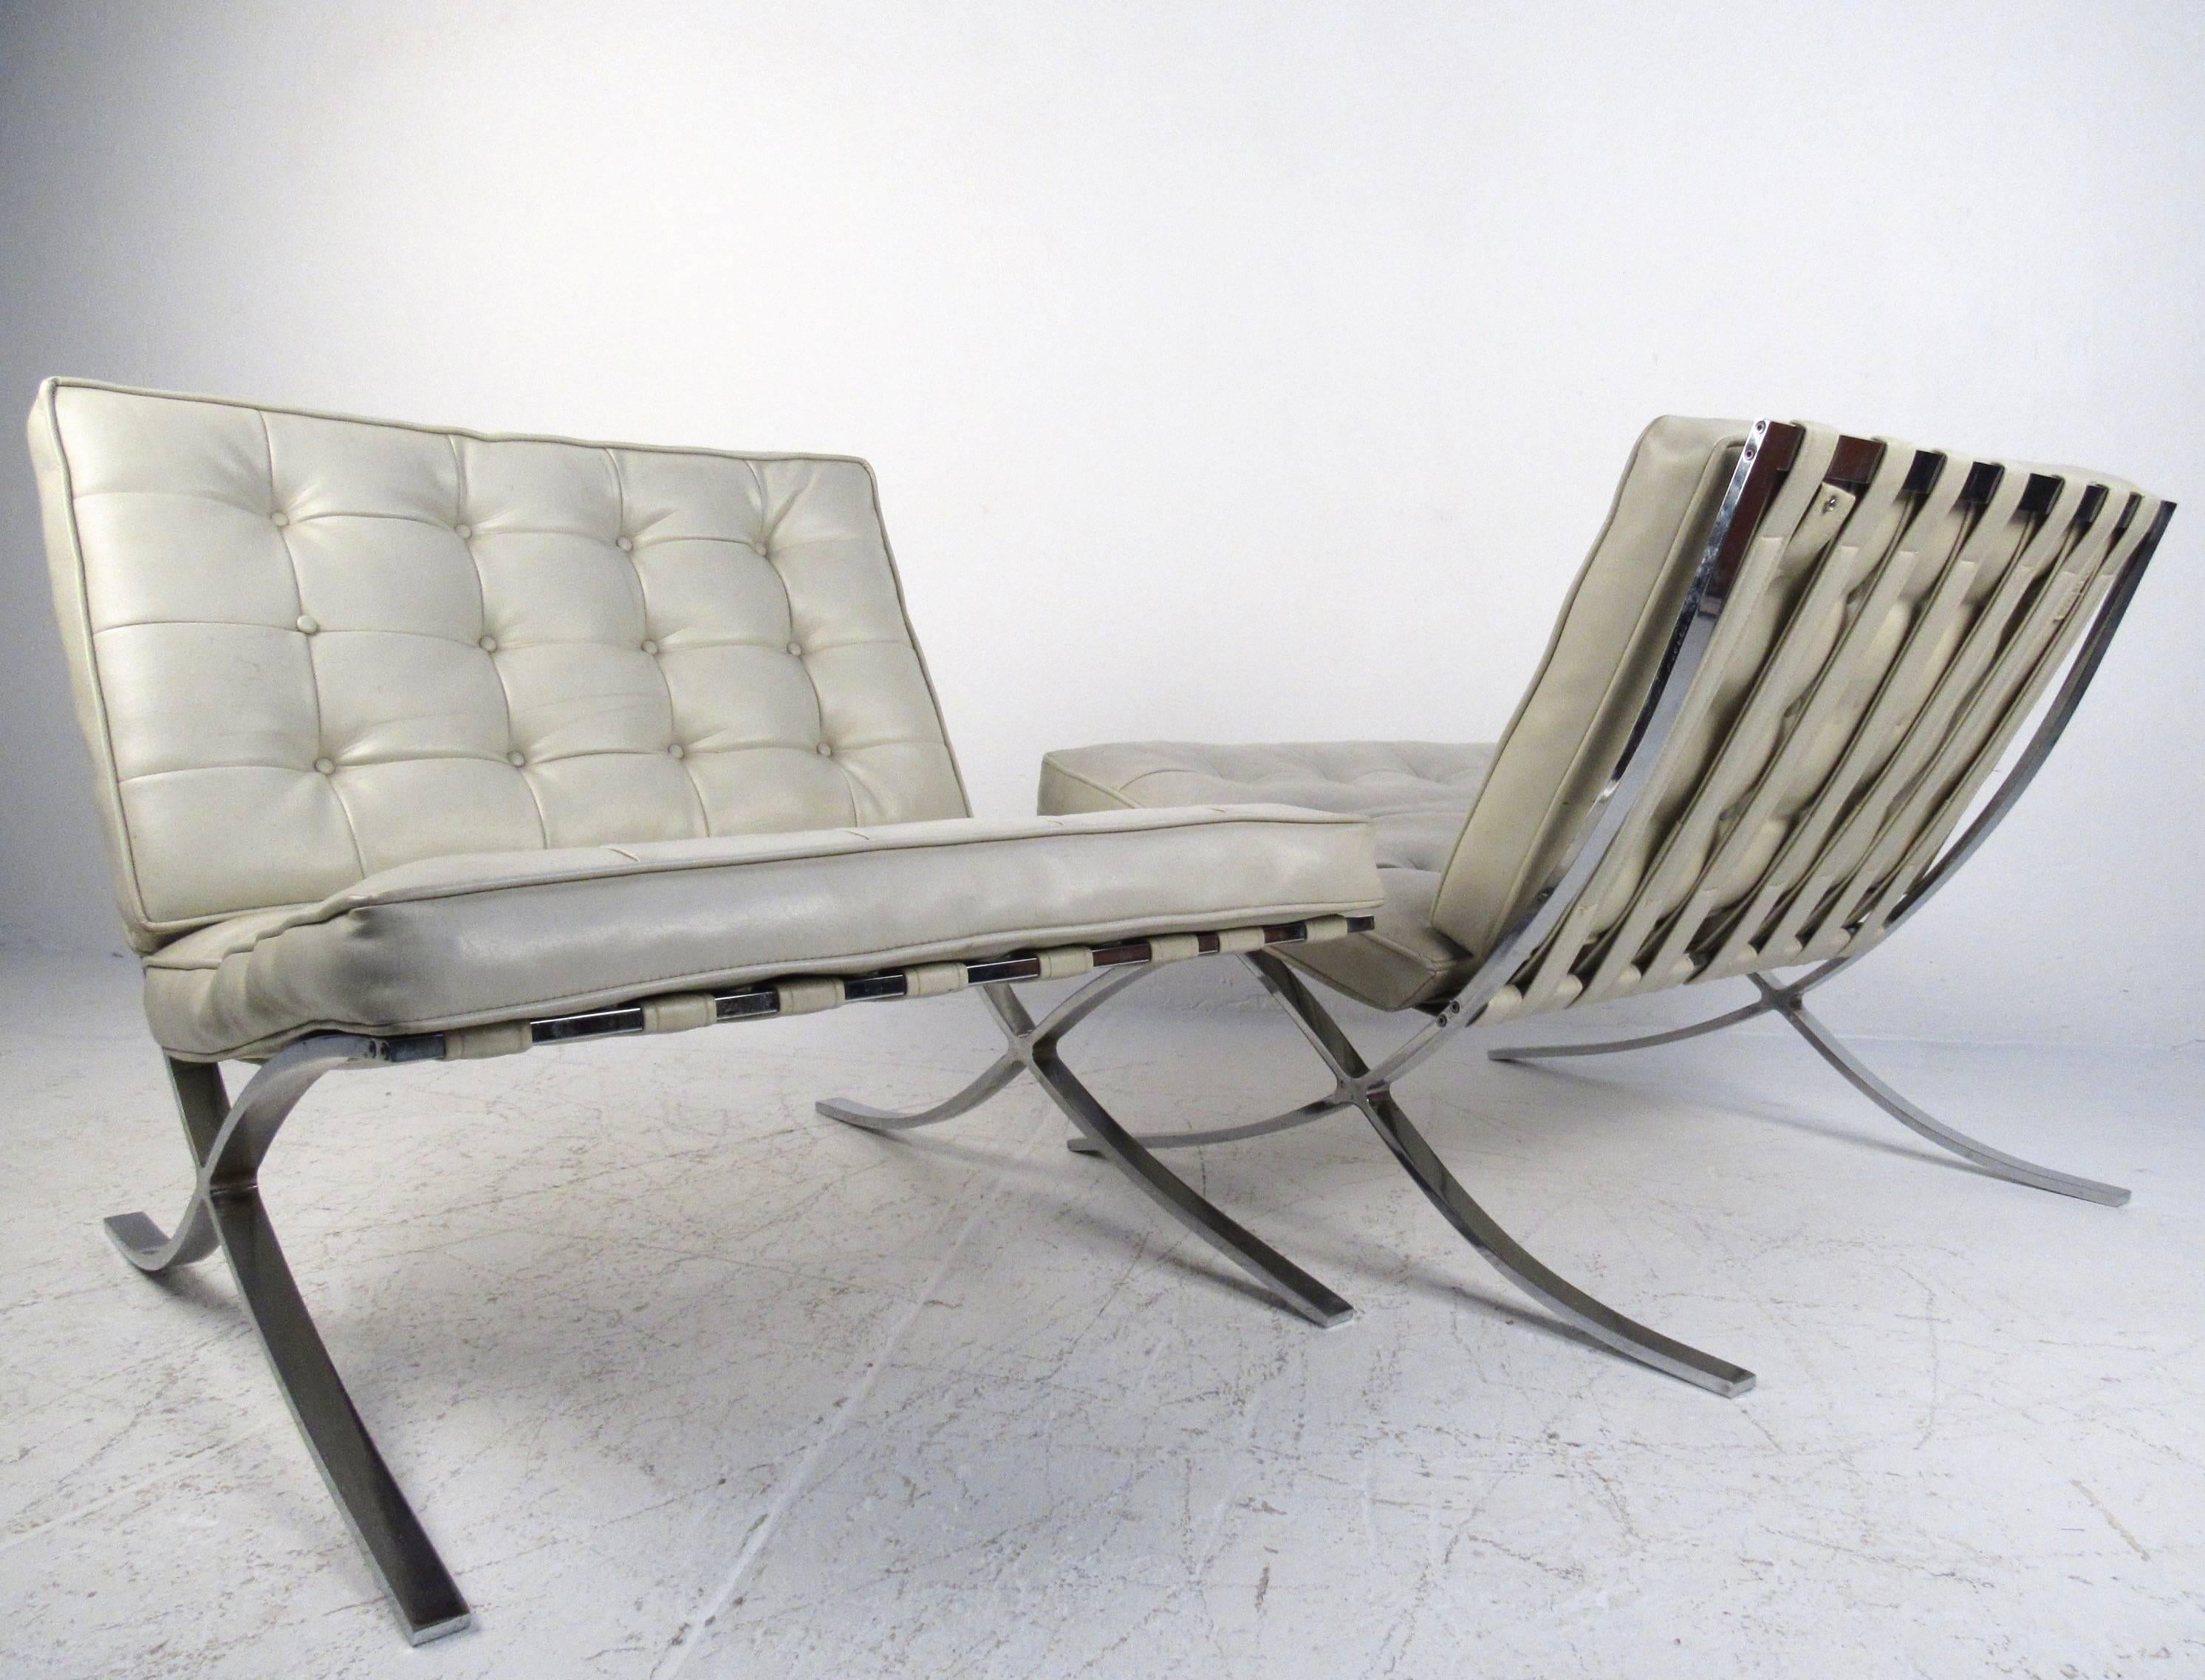 This pair of vintage lounge chairs features wide tufted vinyl seats, strap seat webbing and sleek/stylish chrome frames. This stylish mid-century pair is inspired by the iconic style of Mies van der Rohe and make a comfortable addition to any